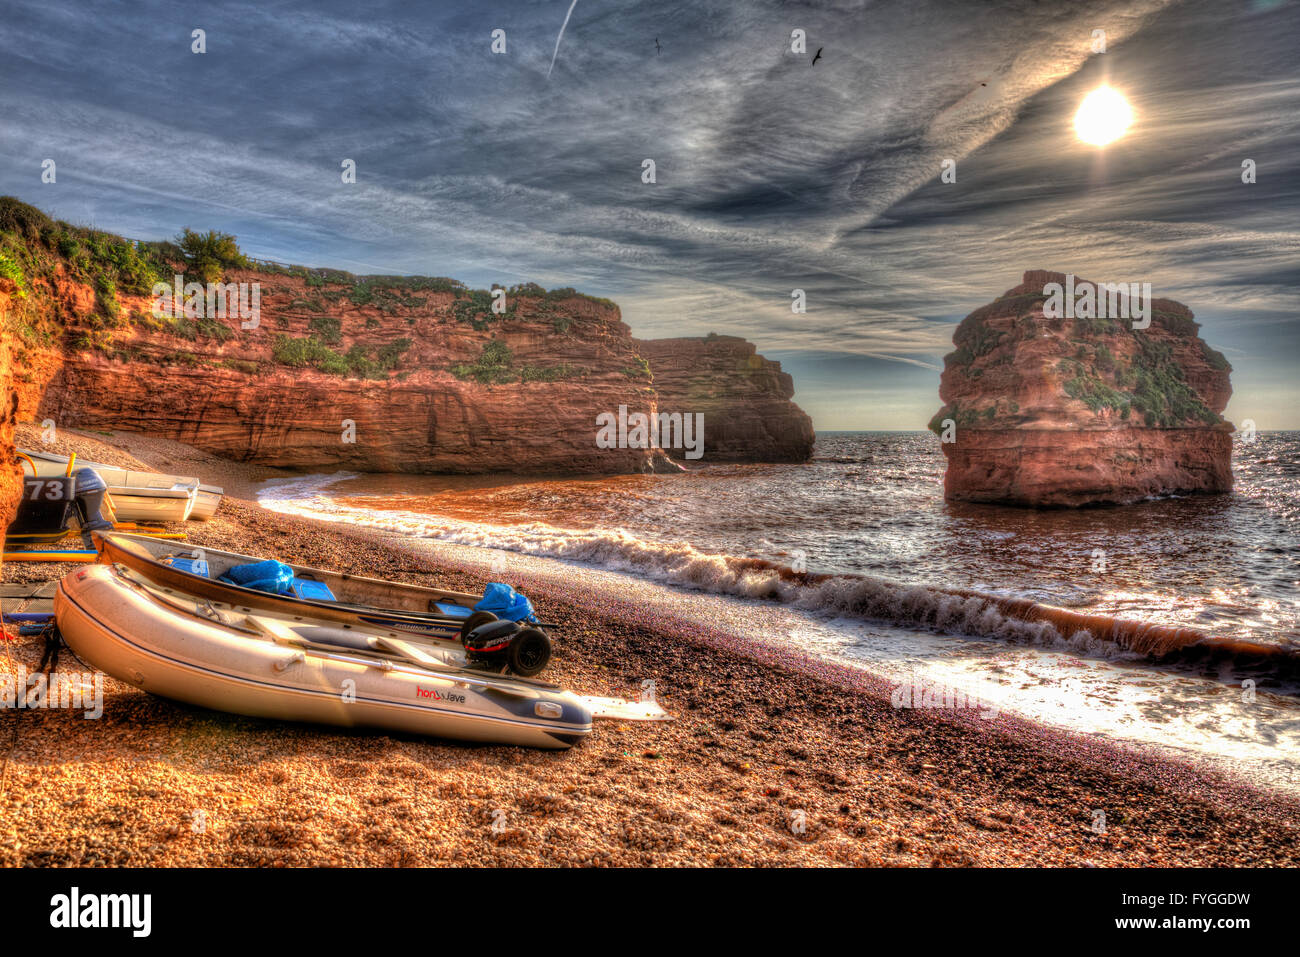 Ladram Bay beach Devon England UK located between Budleigh Salterton and Sidmouth and on the Jurassic Coast in HDR Stock Photo